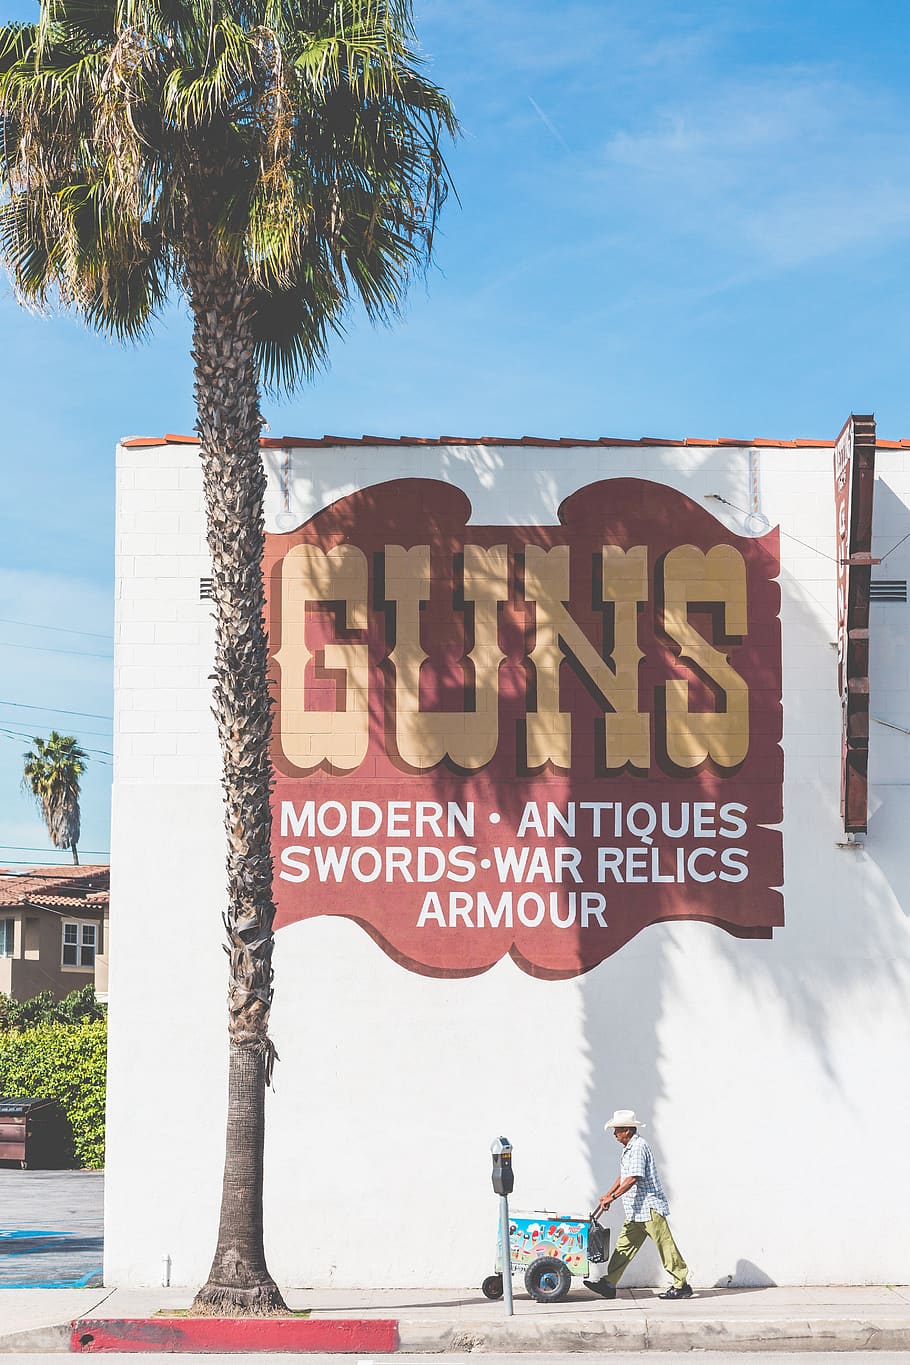 guns, antiques, pawn shop, mexican, las vegas, mexico, sign, signage, typography, text